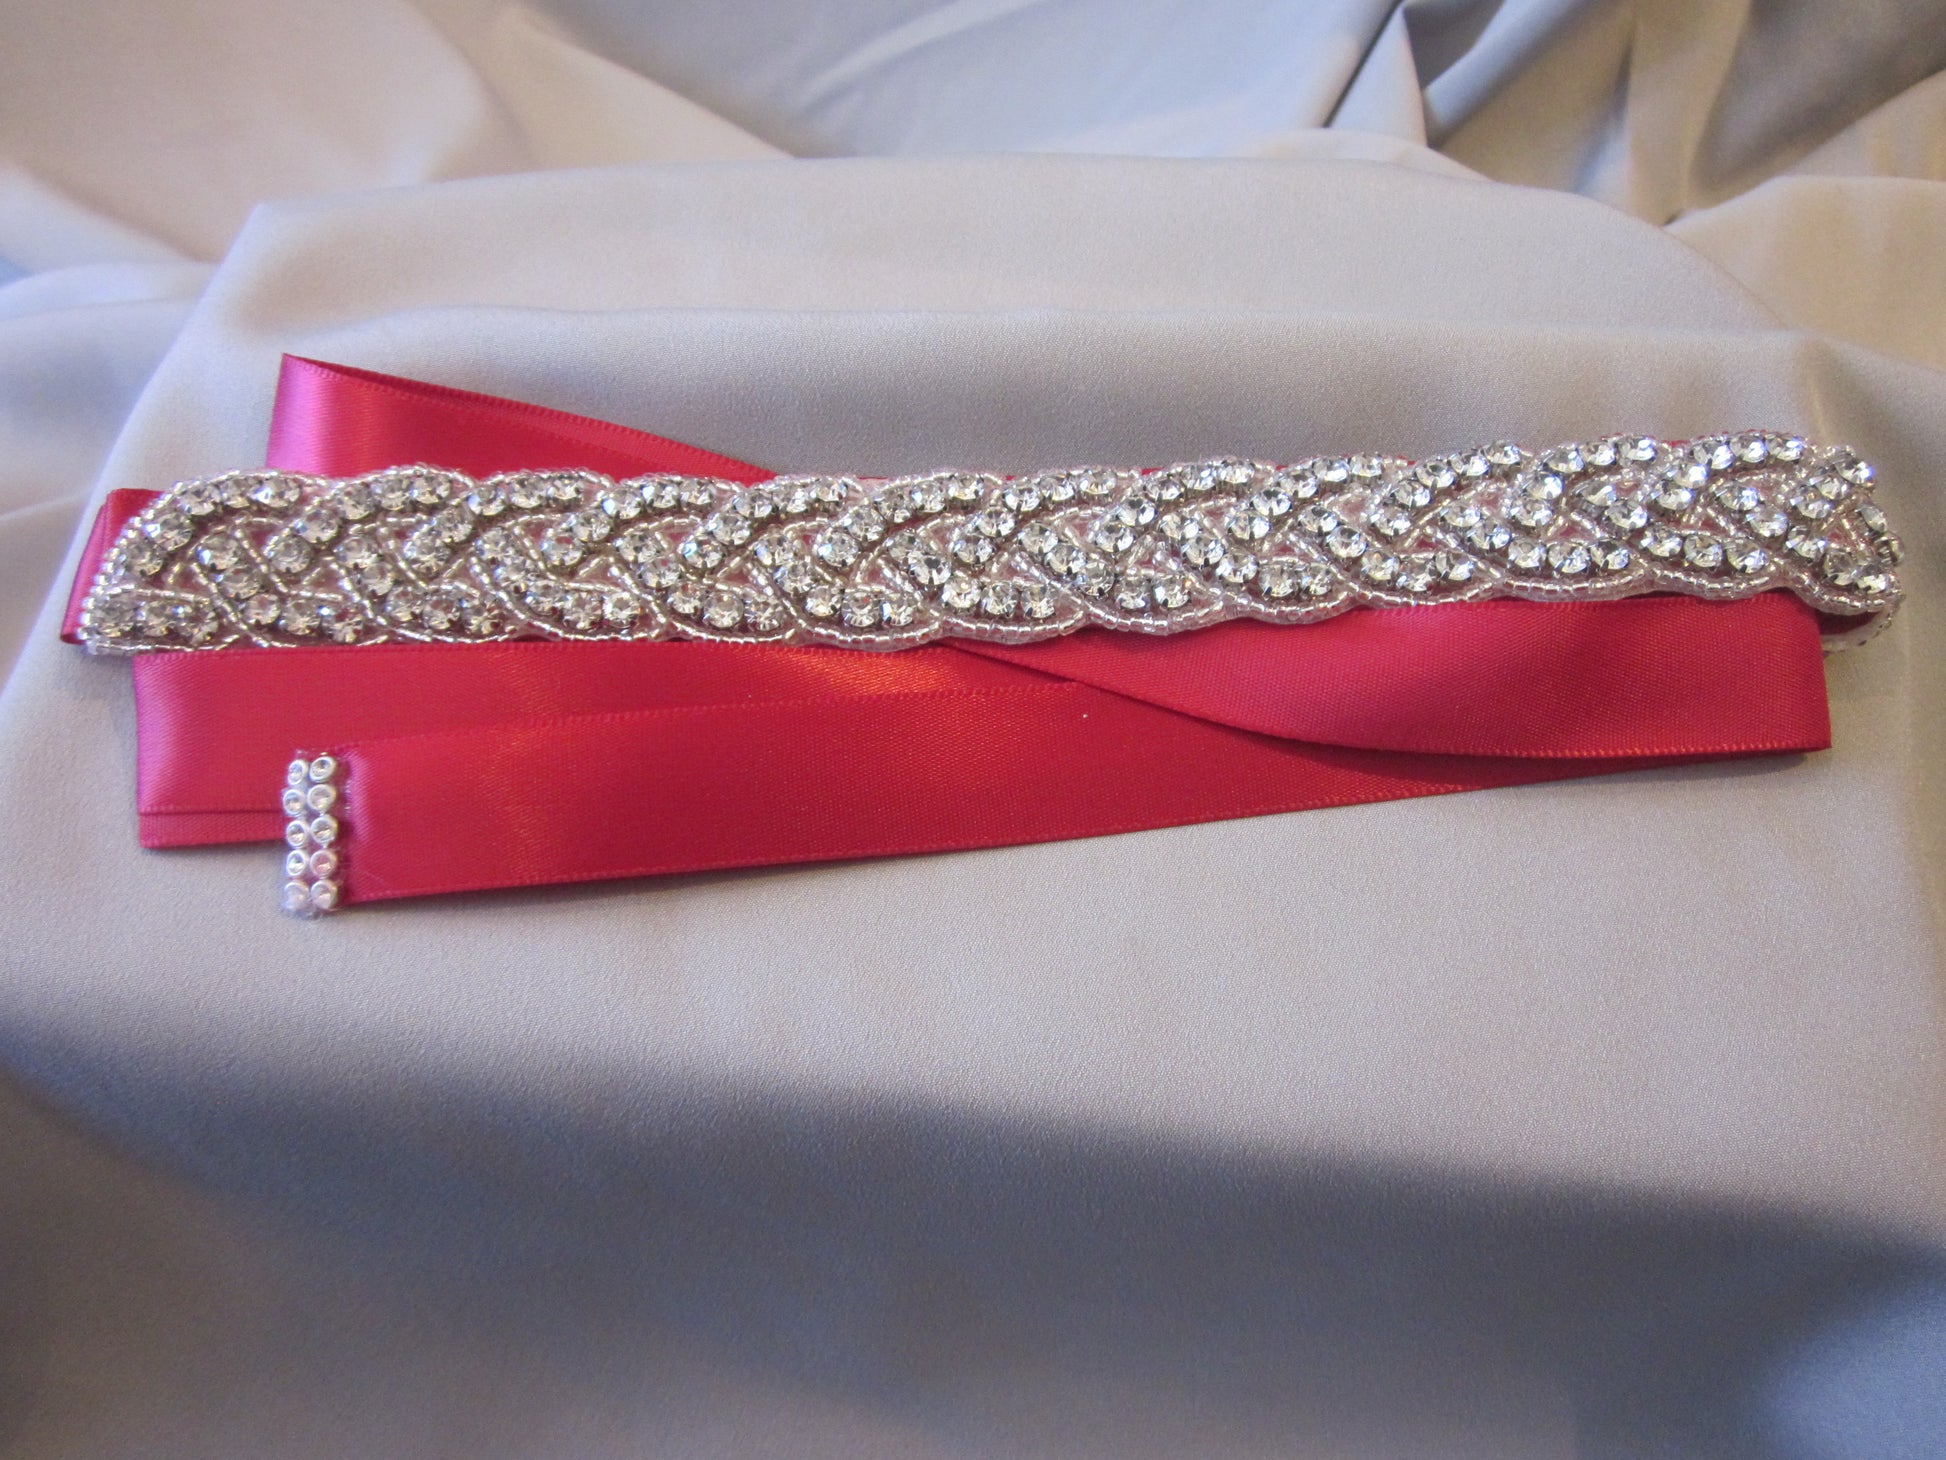 Rhinestone Belt With Red Sash Style S213 - MISS LESTER'S 